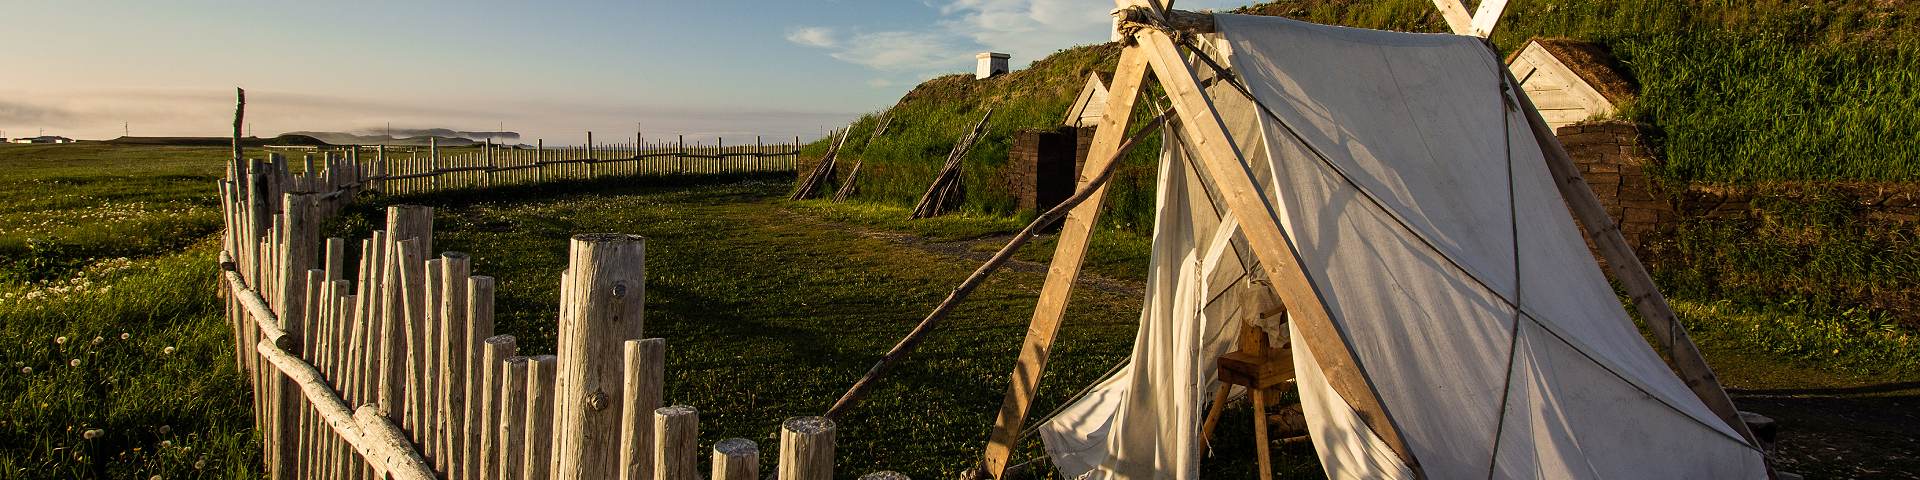 A view of a canvas tent in front of a wood building covered in grass from the Viking encampment at L'Anse aux Meadows National Historic Site